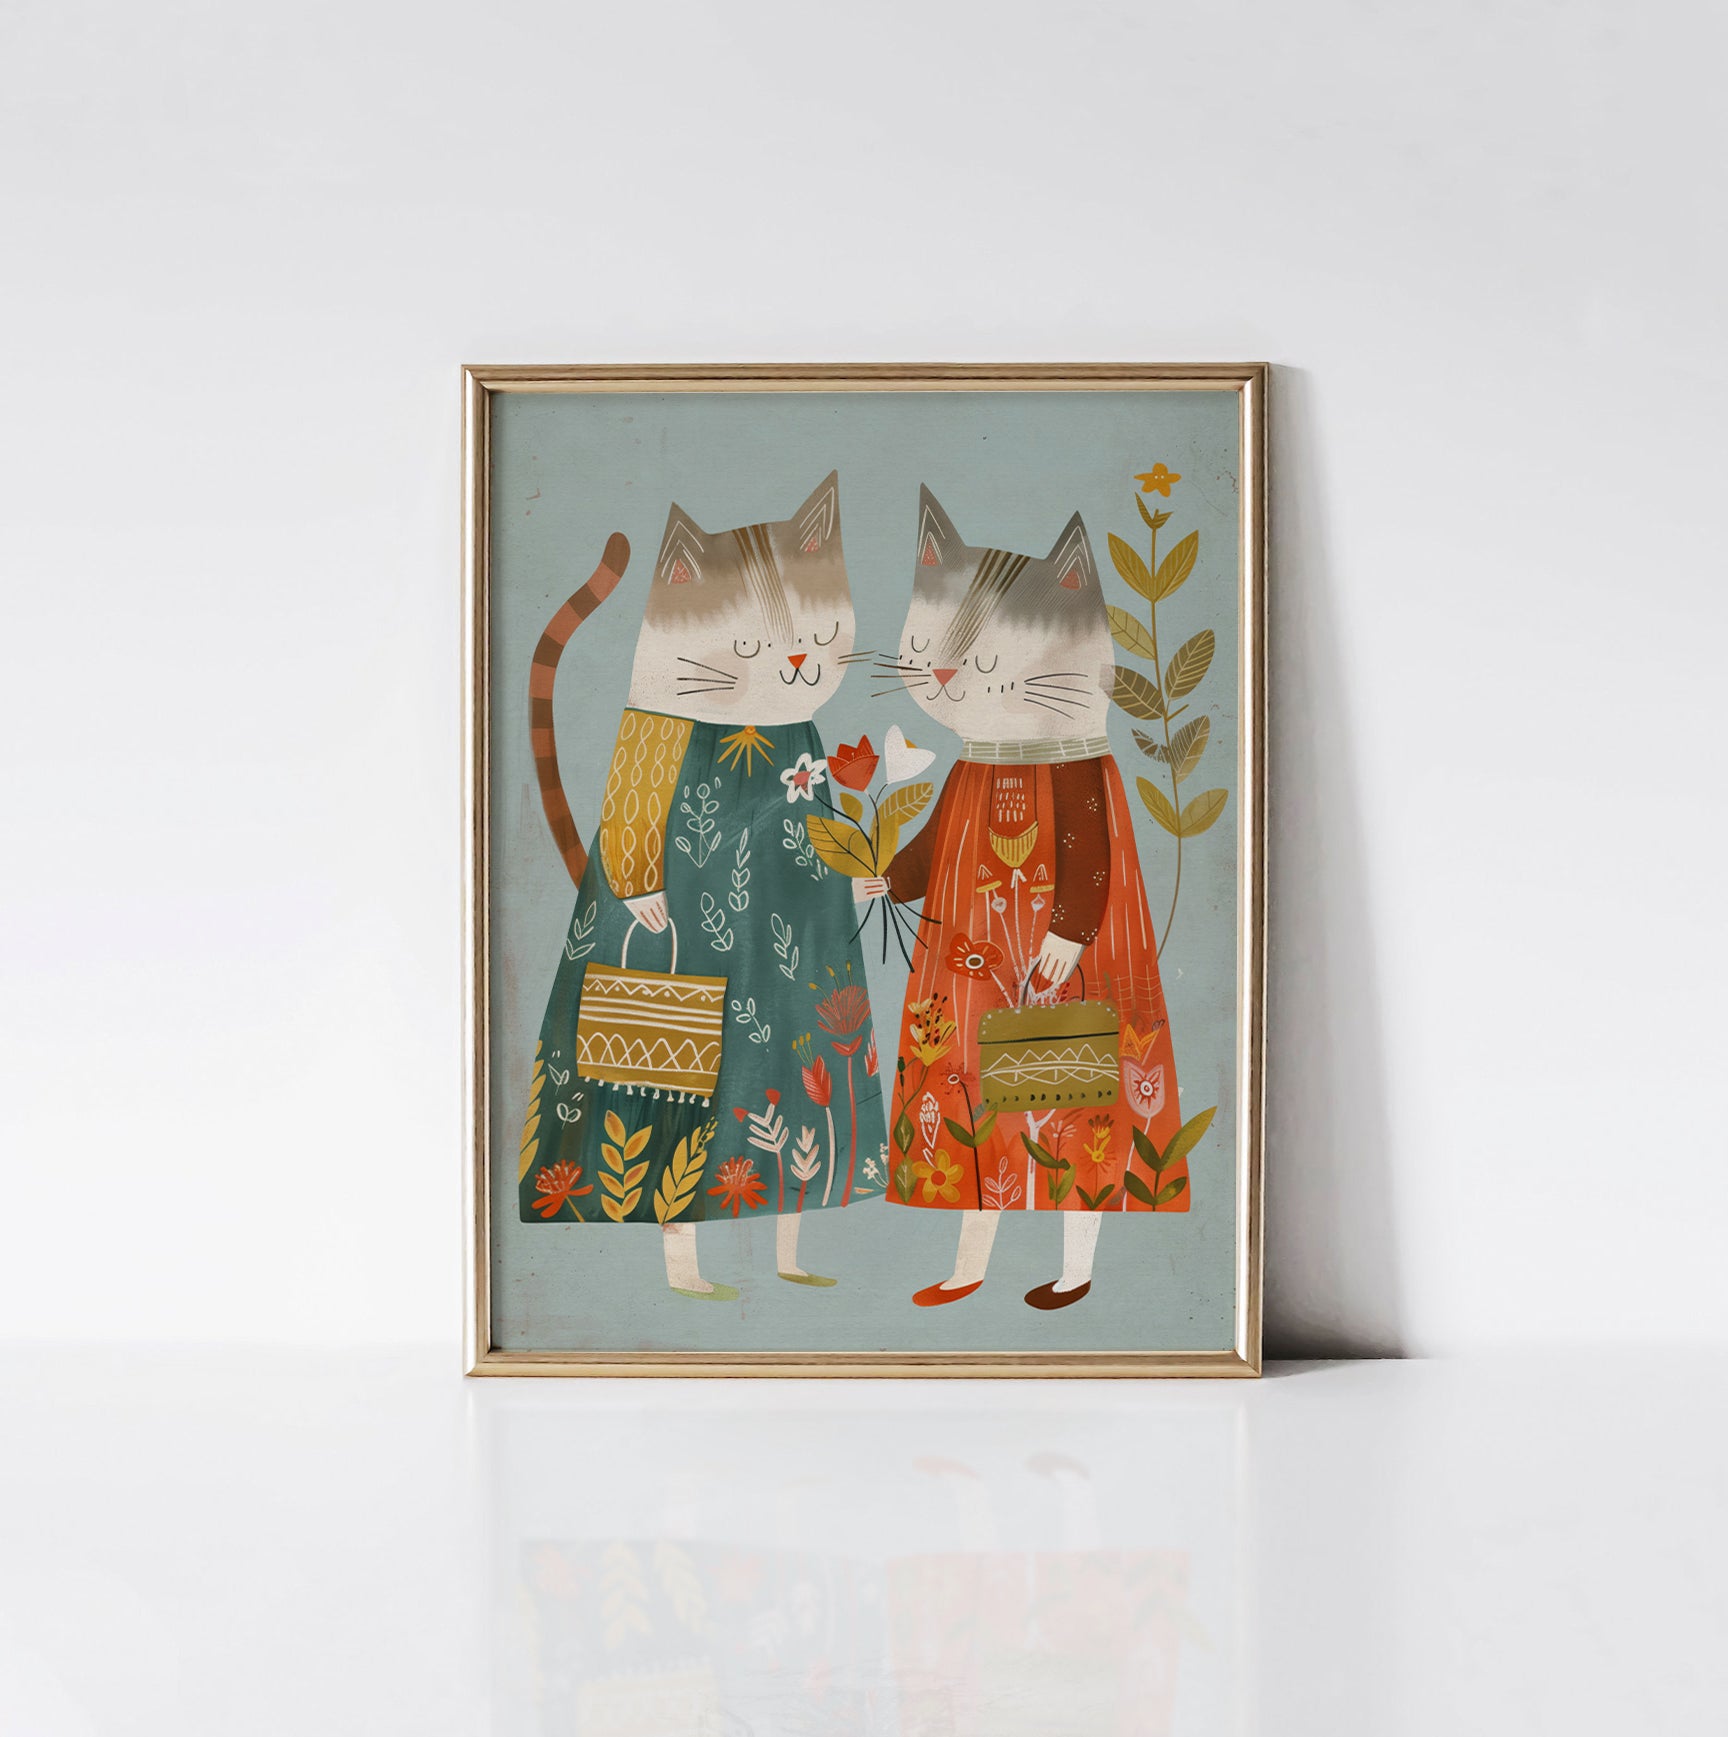 Art print of two cats in colorful floral-themed dresses, framed in a gold frame, adding a whimsical touch to a child's room decor